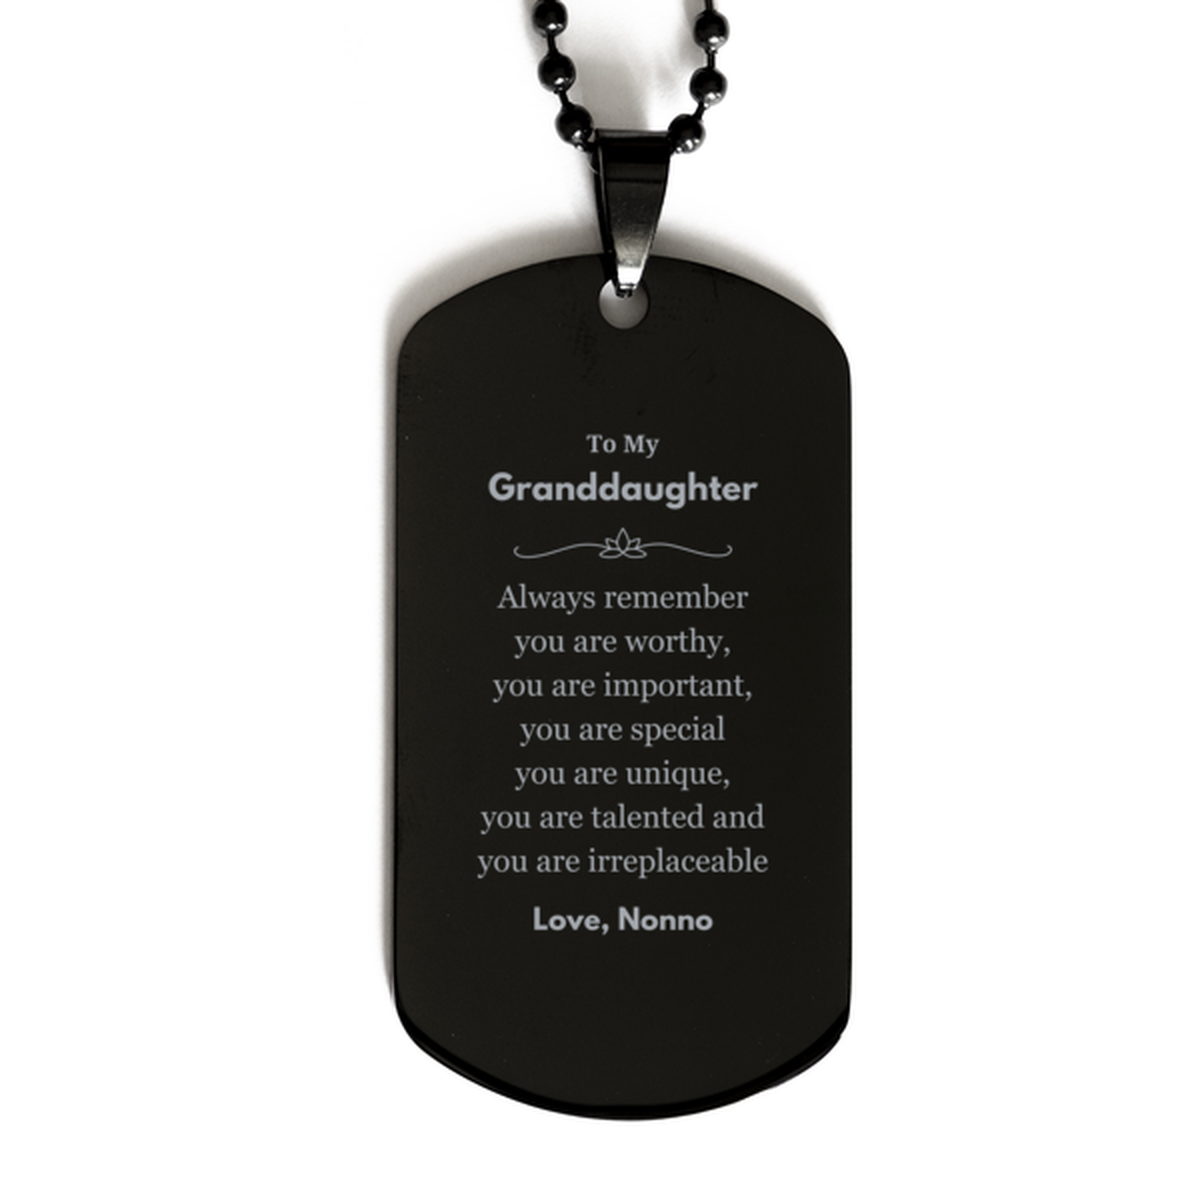 Granddaughter Birthday Gifts from Nonno, Inspirational Black Dog Tag for Granddaughter Christmas Graduation Gifts for Granddaughter Always remember you are worthy, you are important. Love, Nonno